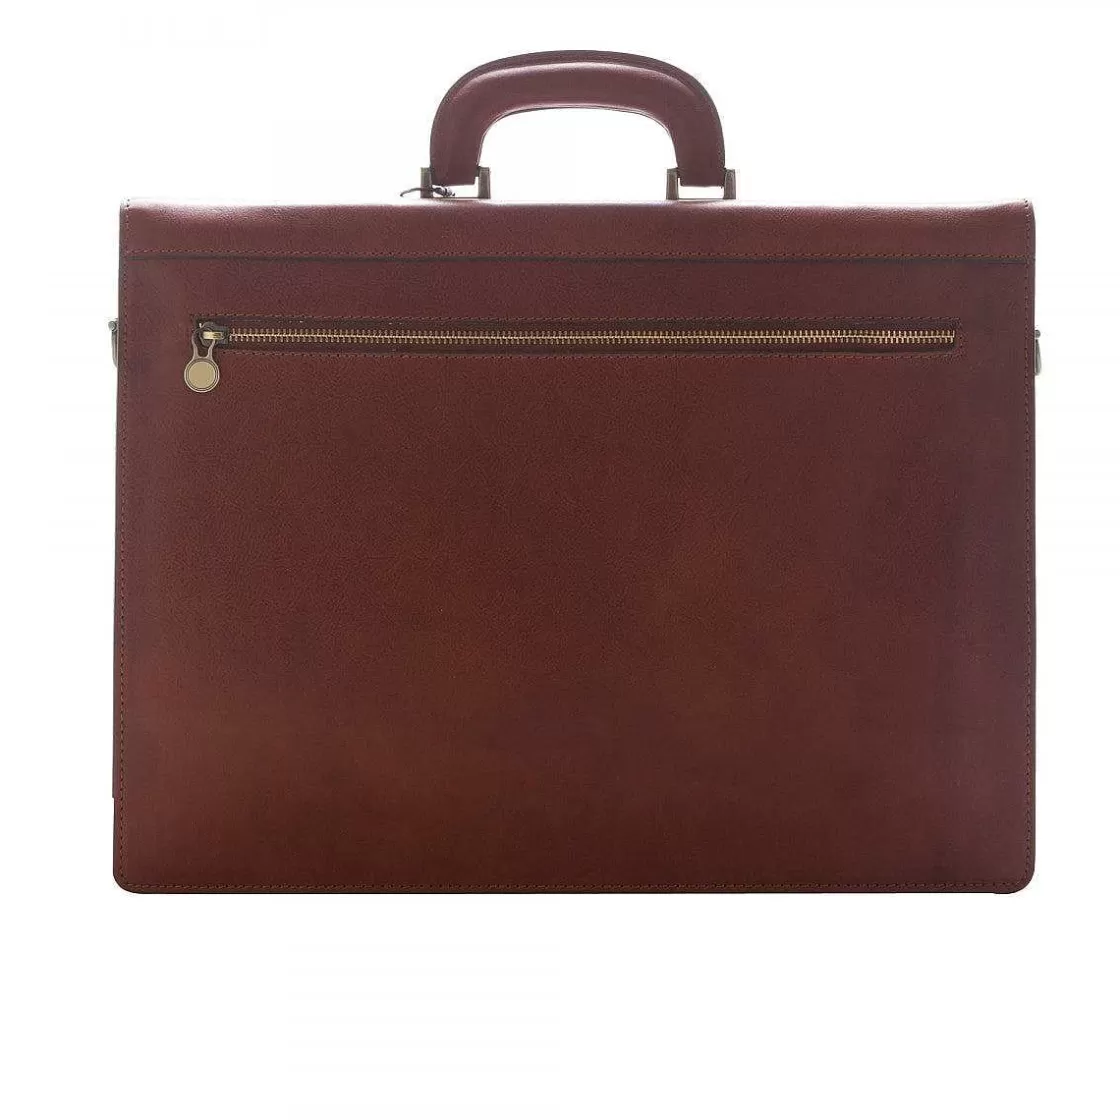 Leonardo Professional Briefcase With Two Compartments In Full Grain Leather With Flap Closure And Adjustable Shoulder Strap Flash Sale